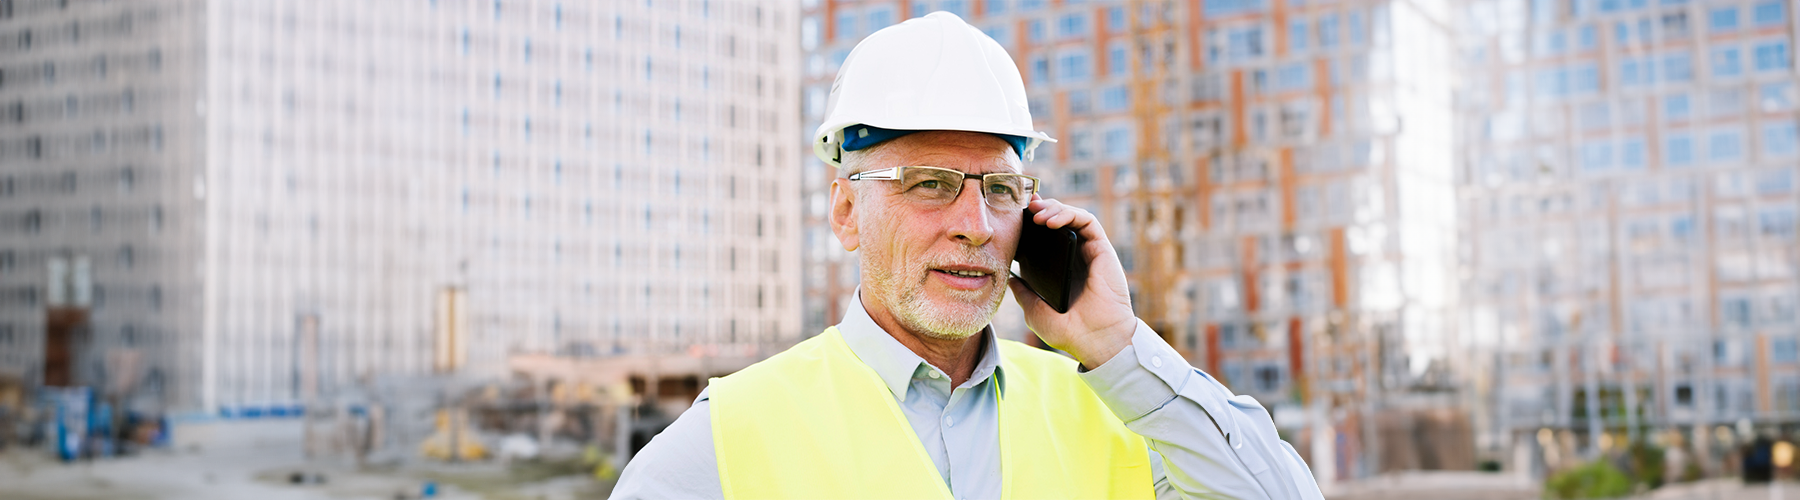 Everything You Need to Know About Becoming a Construction Superintendent